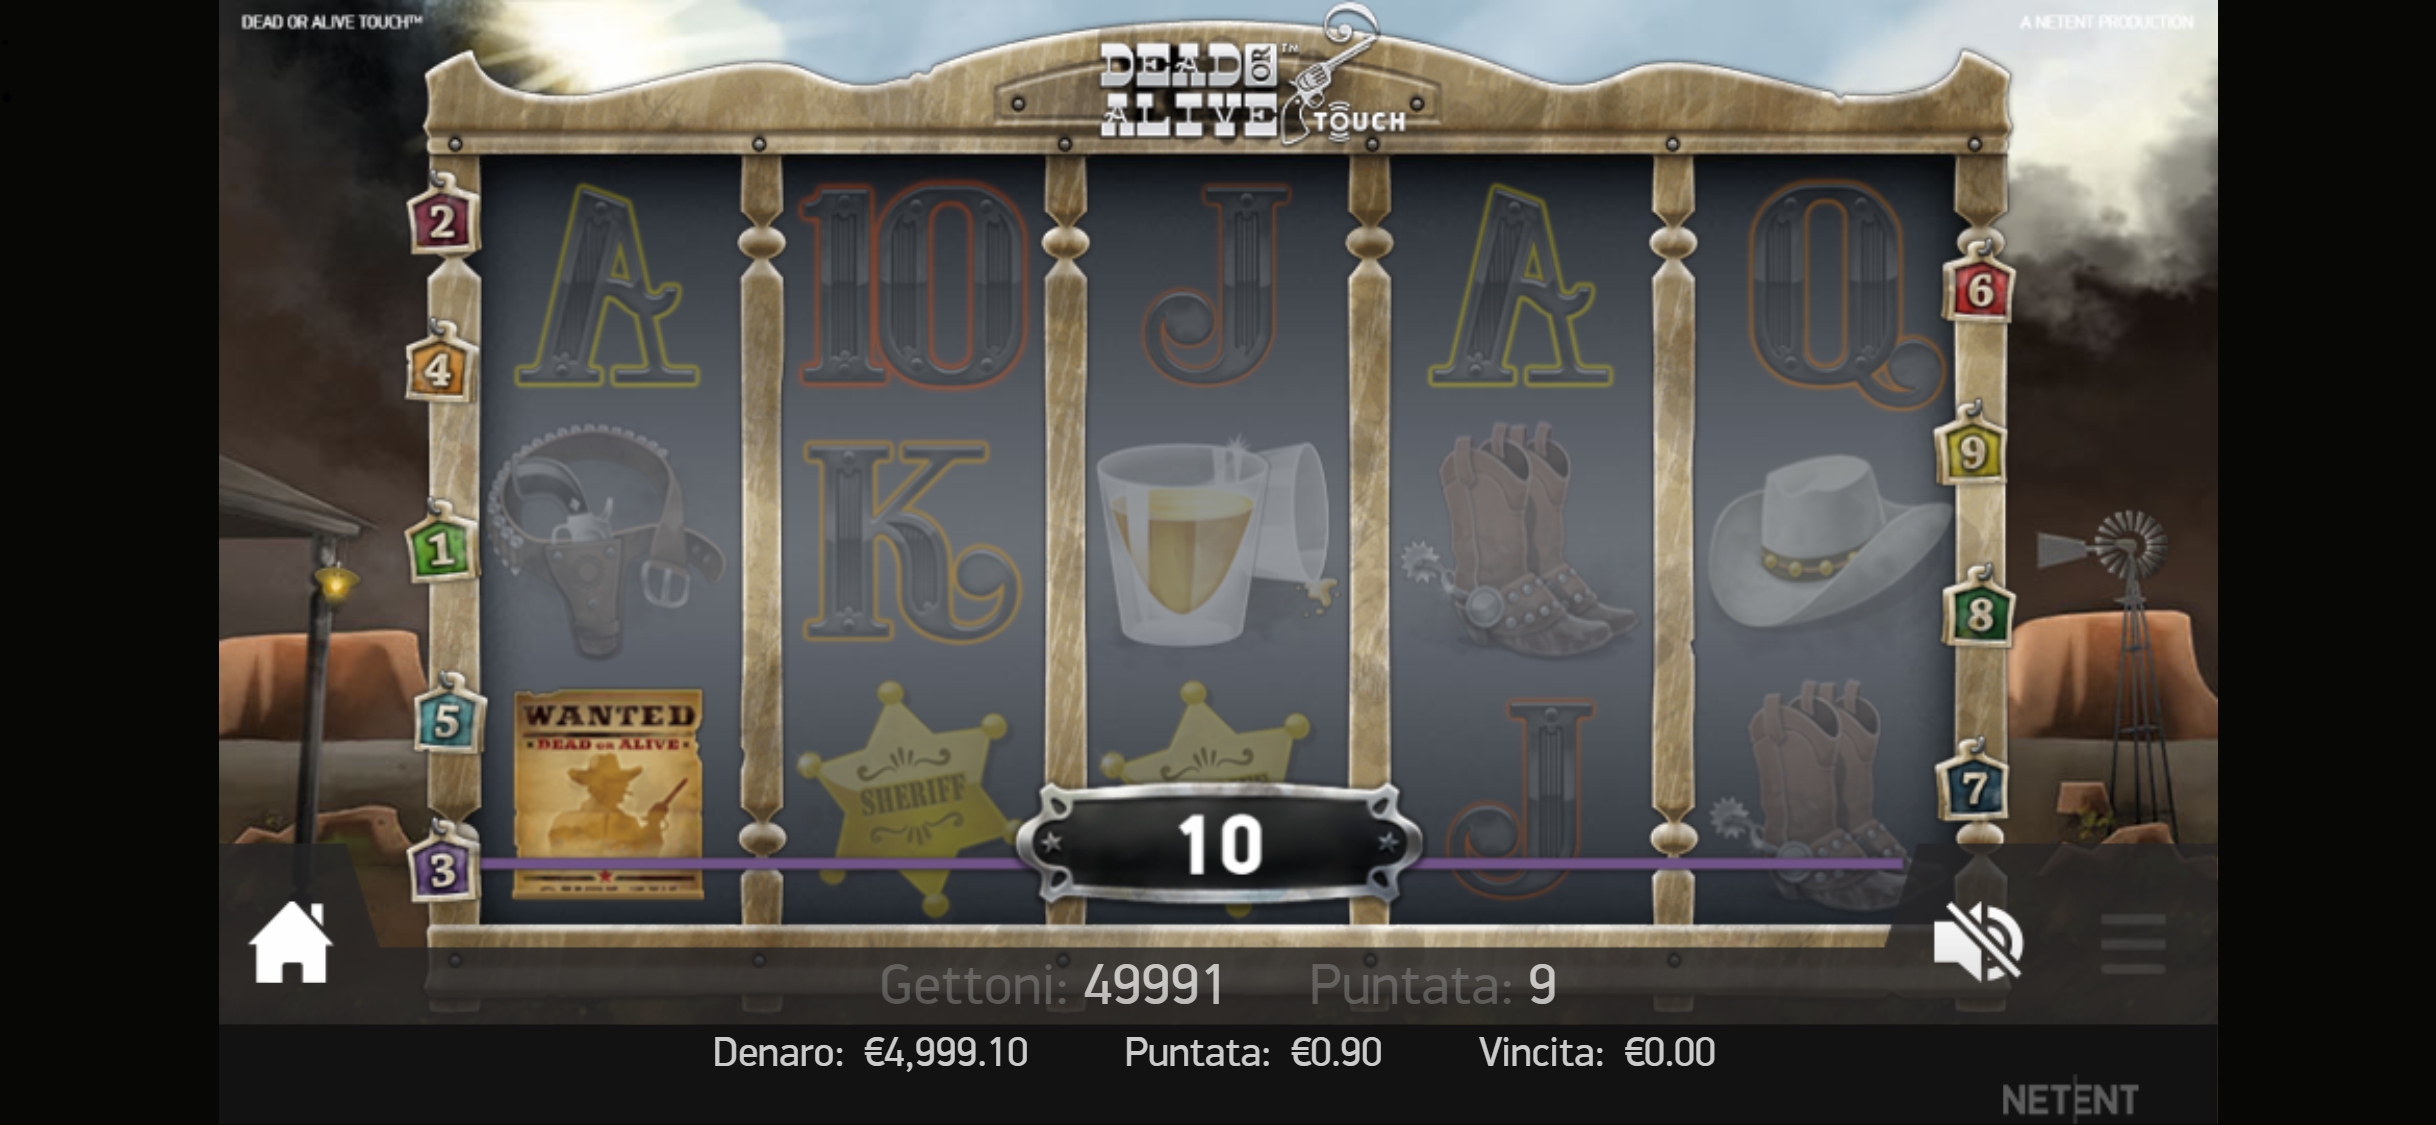 Slottery Mobile Slot Games Review